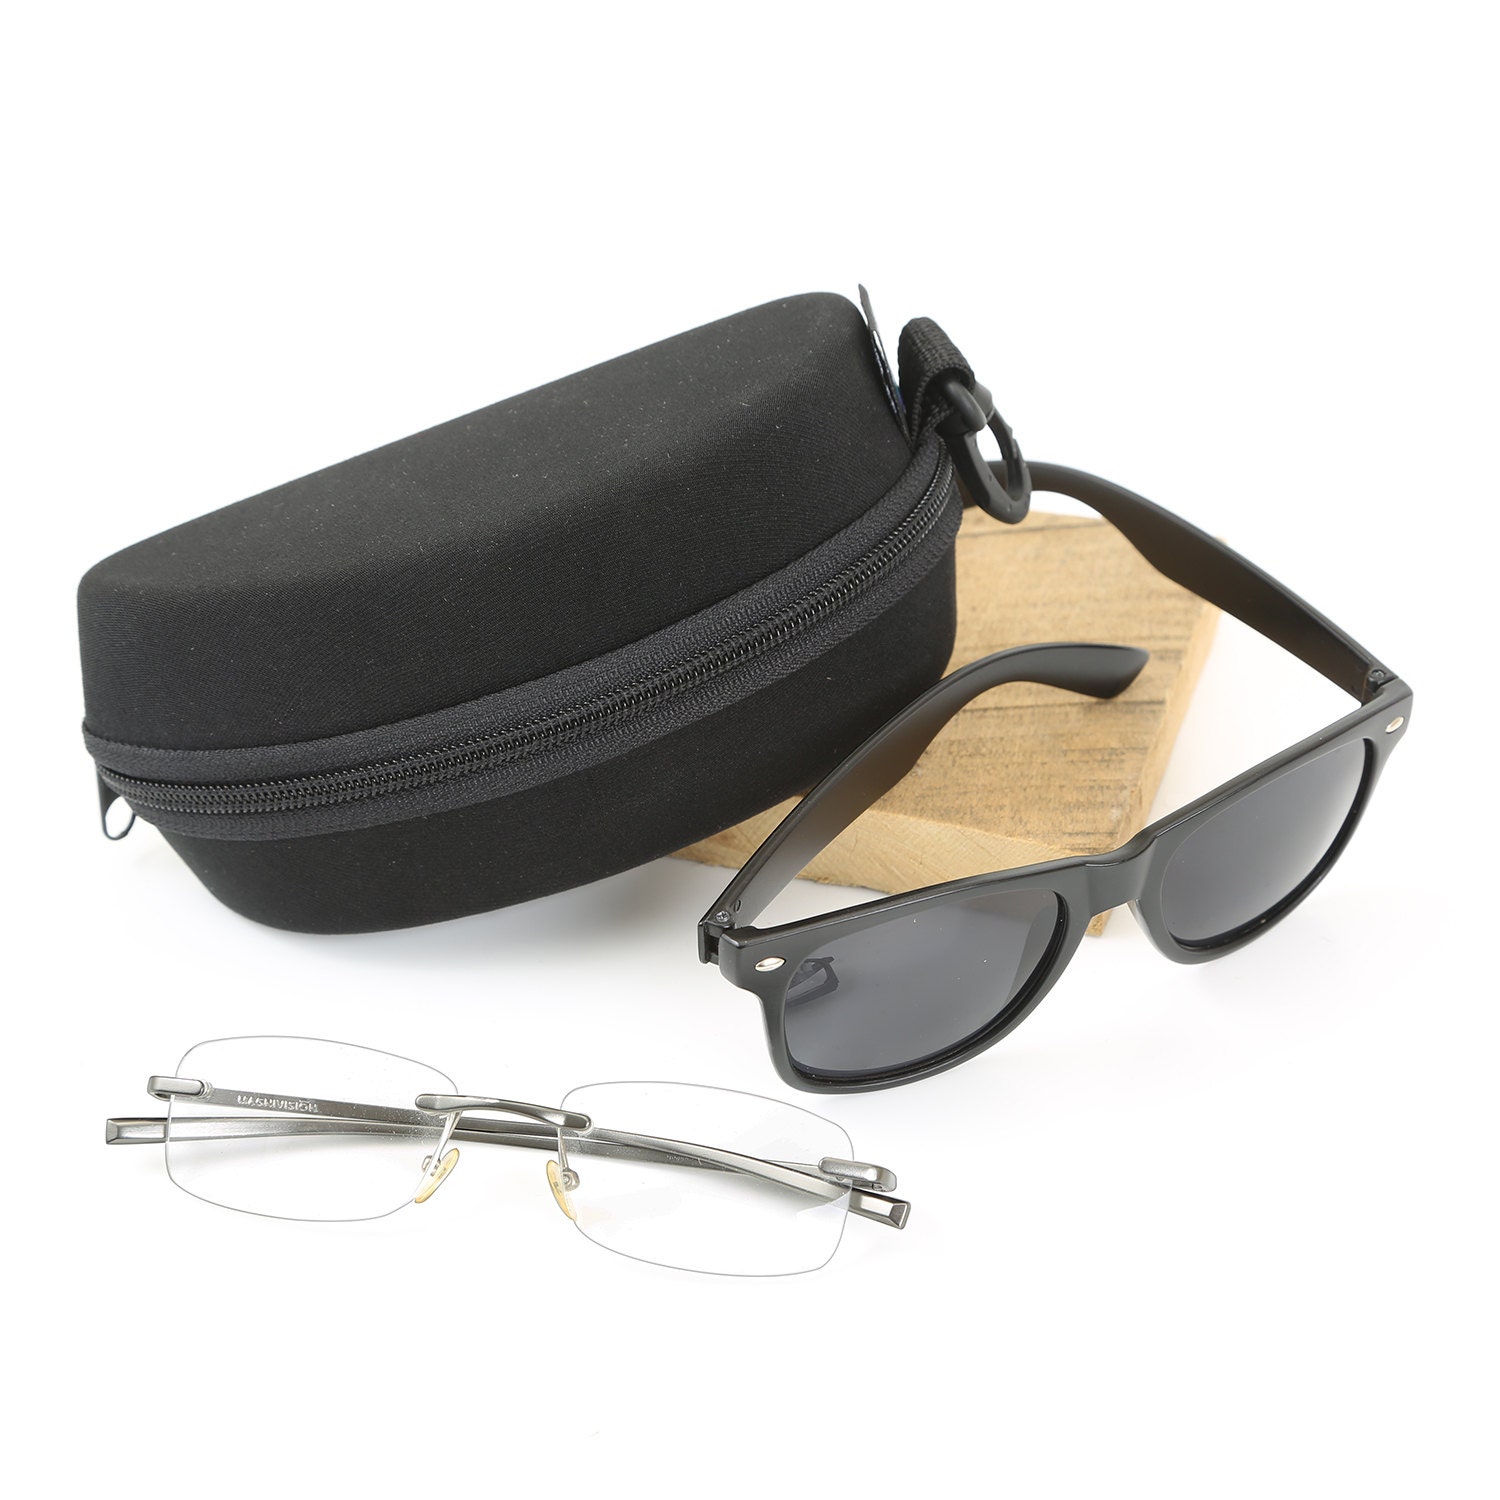 Dual Glasses Case for Two Frames - Classic Clamshell 2 Eyeglasses Case -  Built-in Mirror (Black)